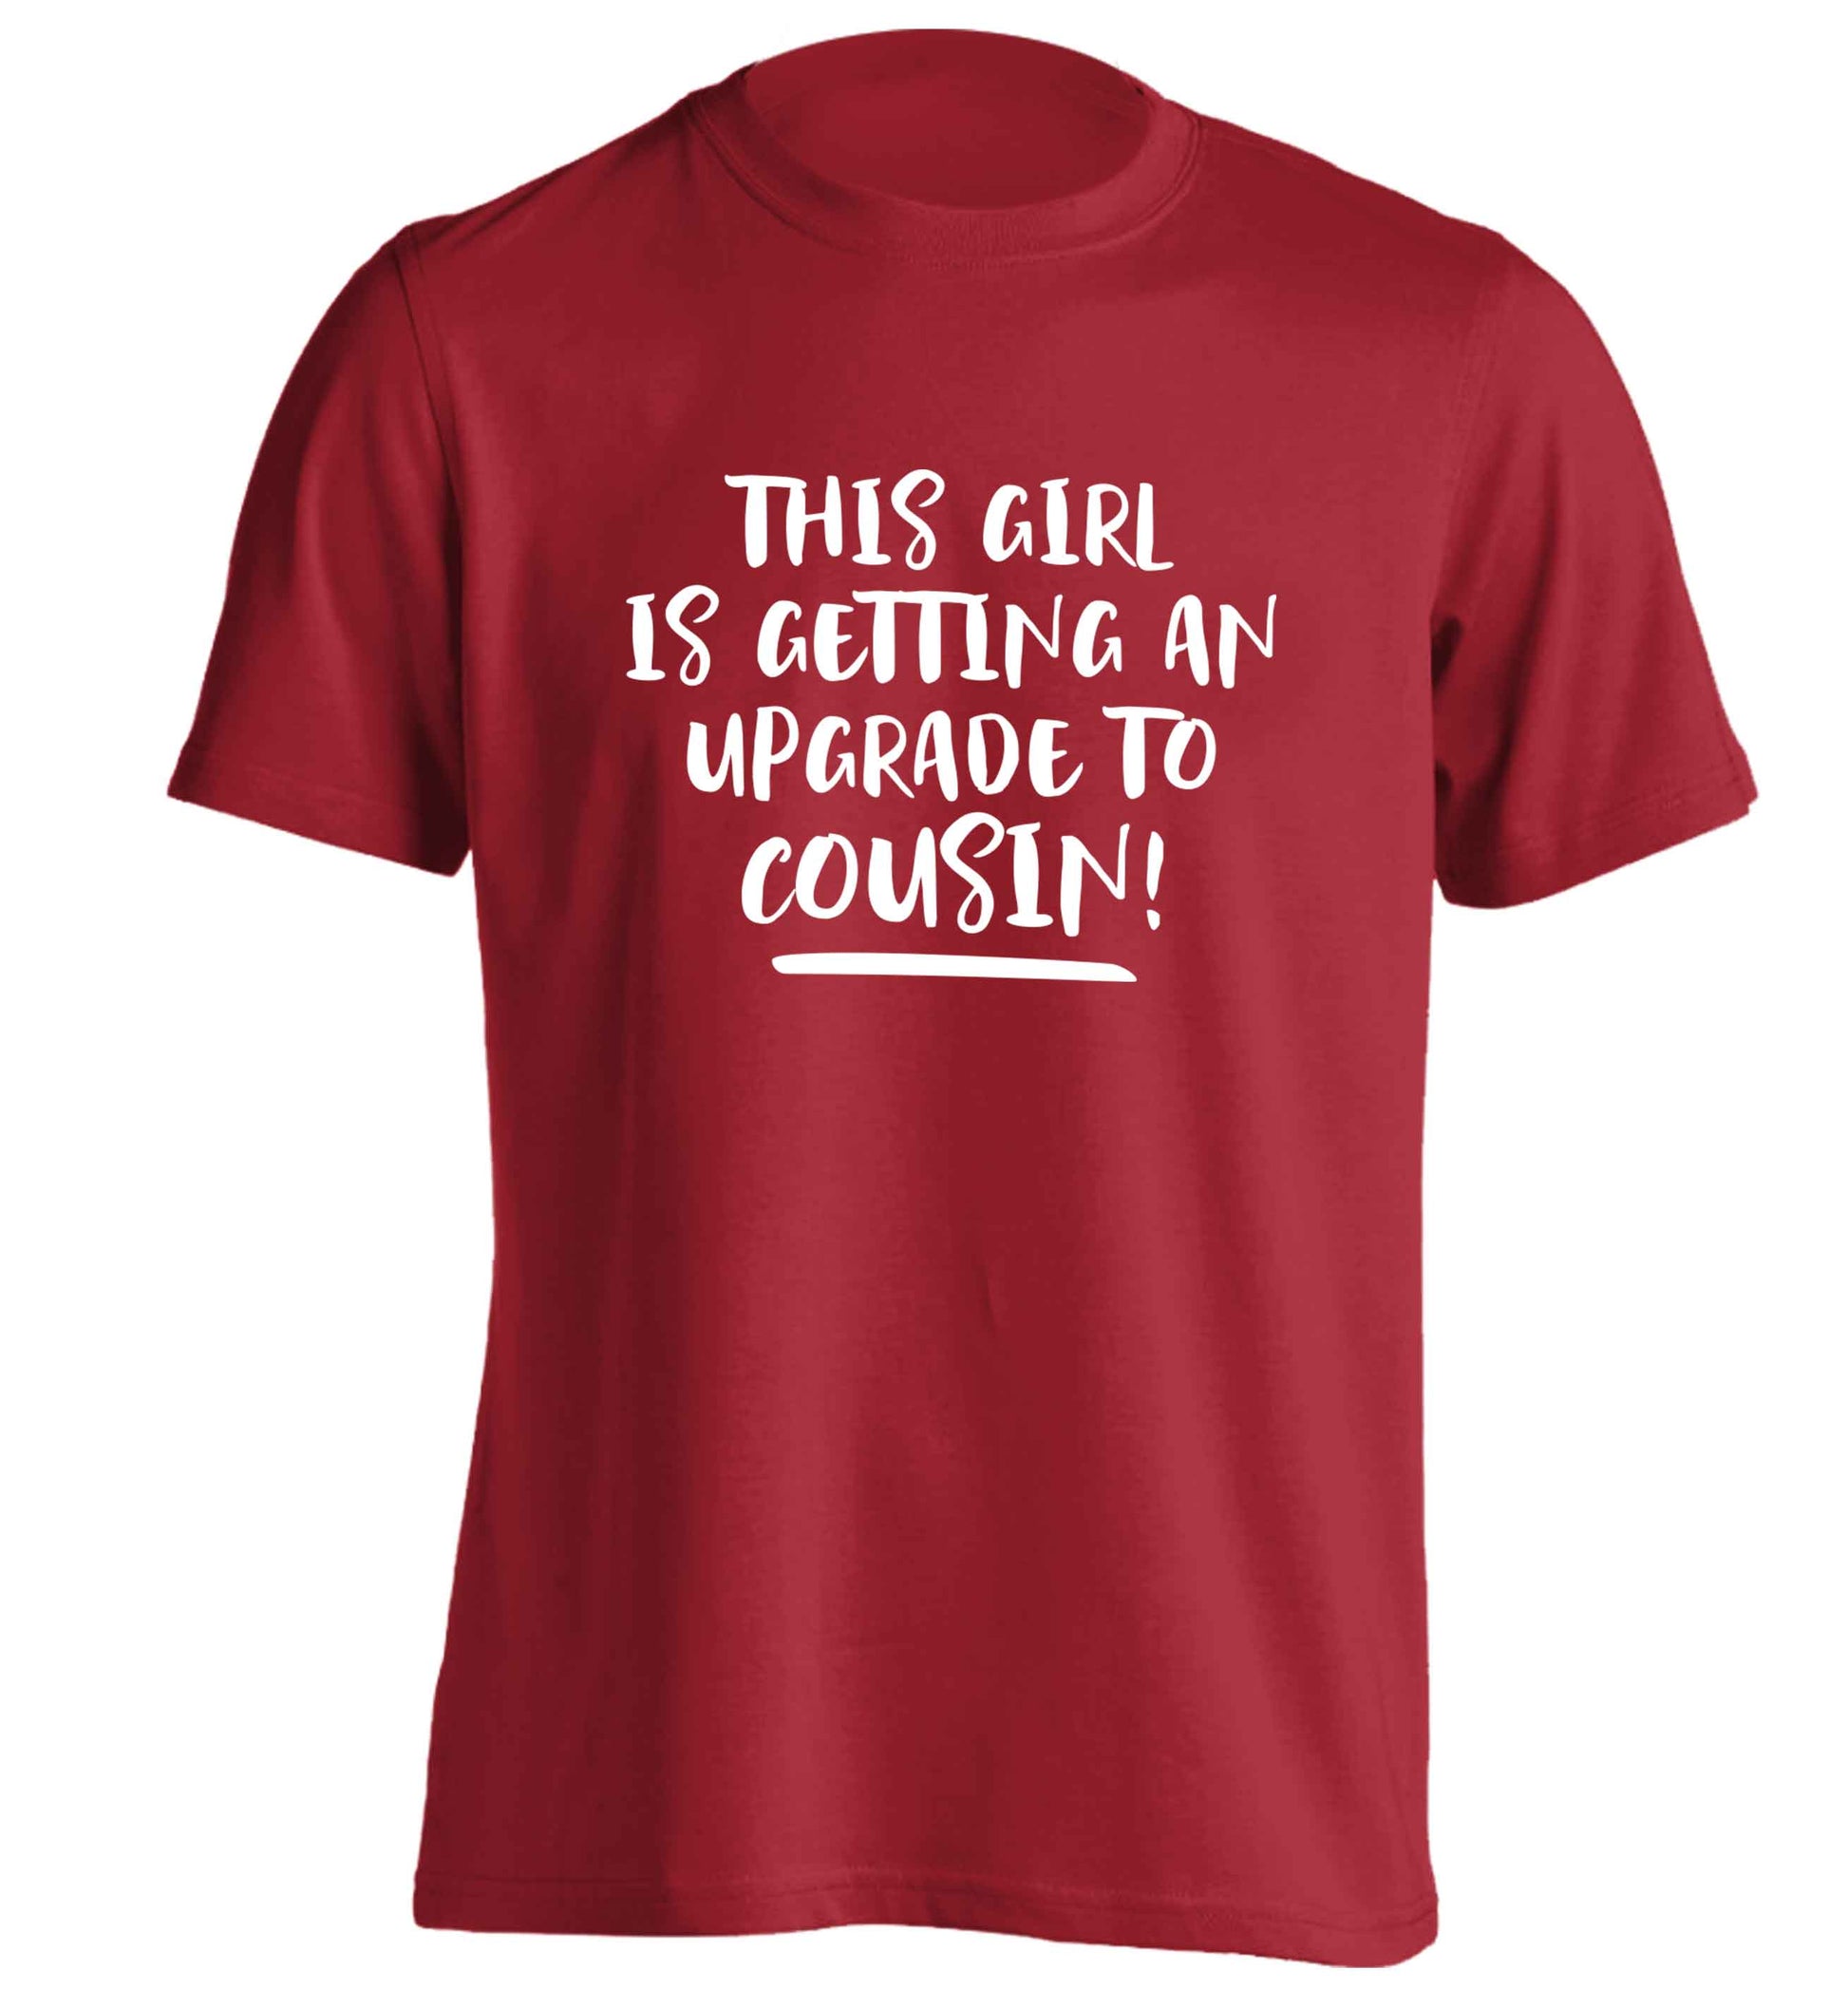 This girl is getting an upgrade to cousin! adults unisex red Tshirt 2XL